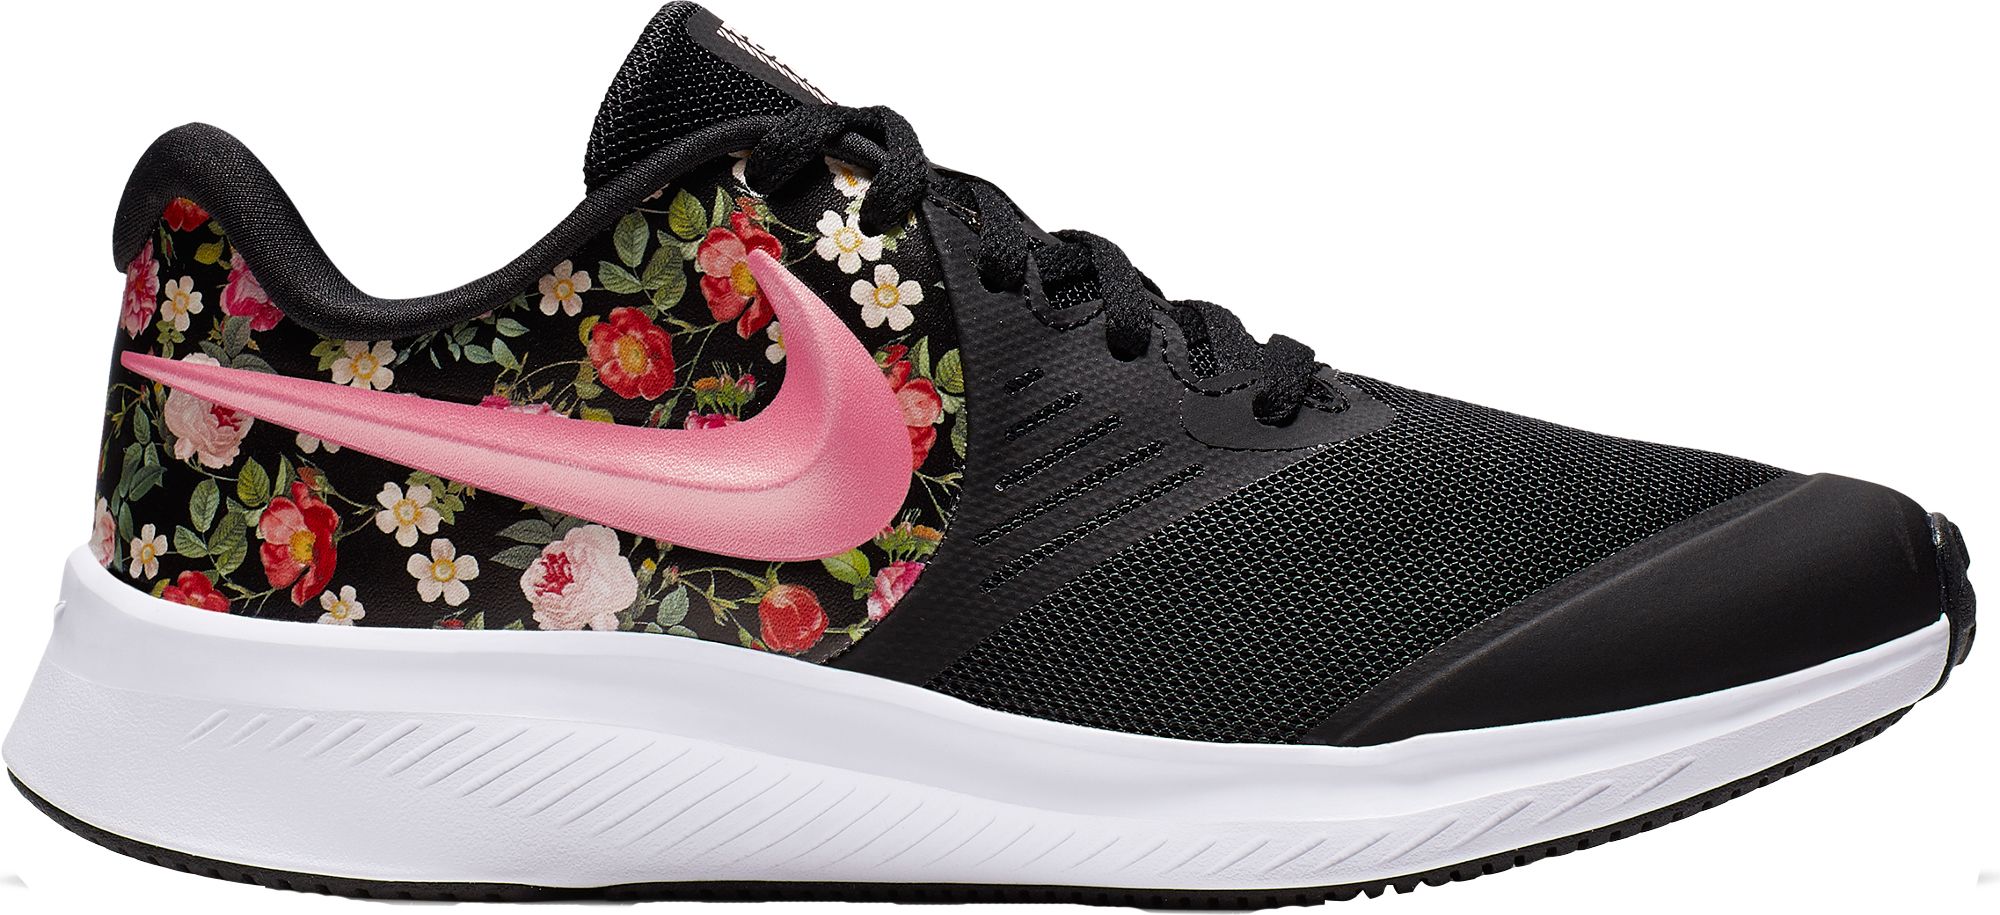 nike shoes with flowers on them